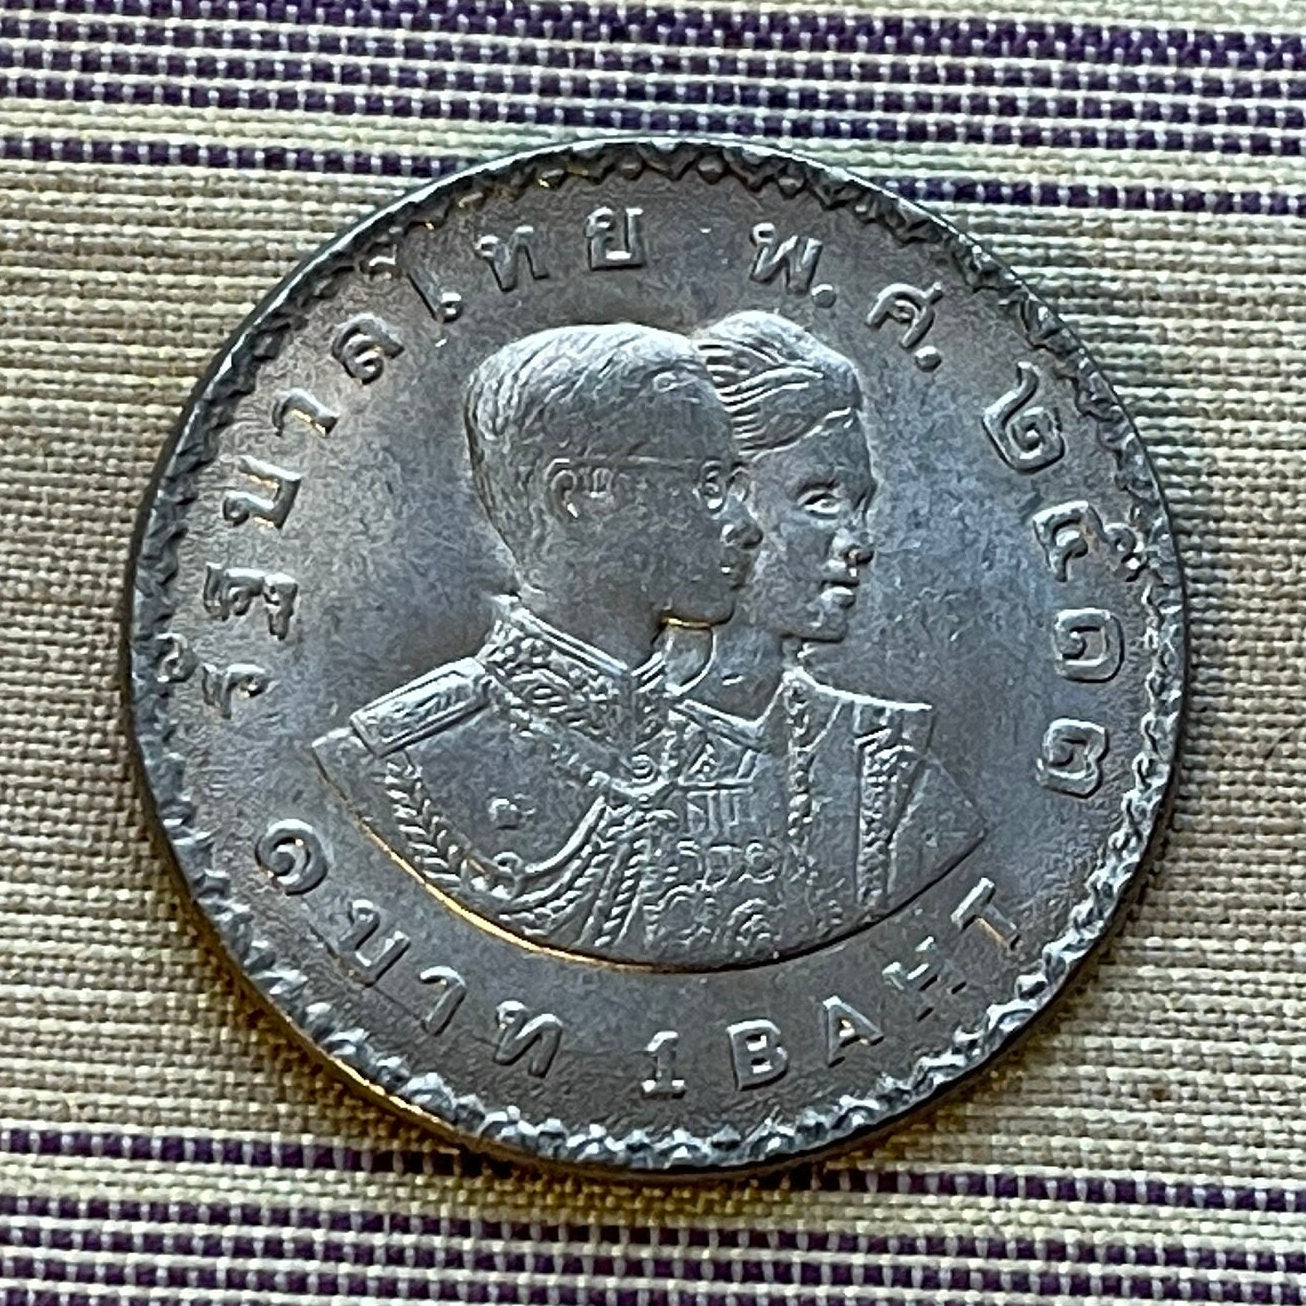 Royal Couple King Bhumibol and Queen Sirikit 1 Baht Thailand Authentic Coin Money for Jewelry (Asian Games) (1970) (Bangkok) (Ever Onward)